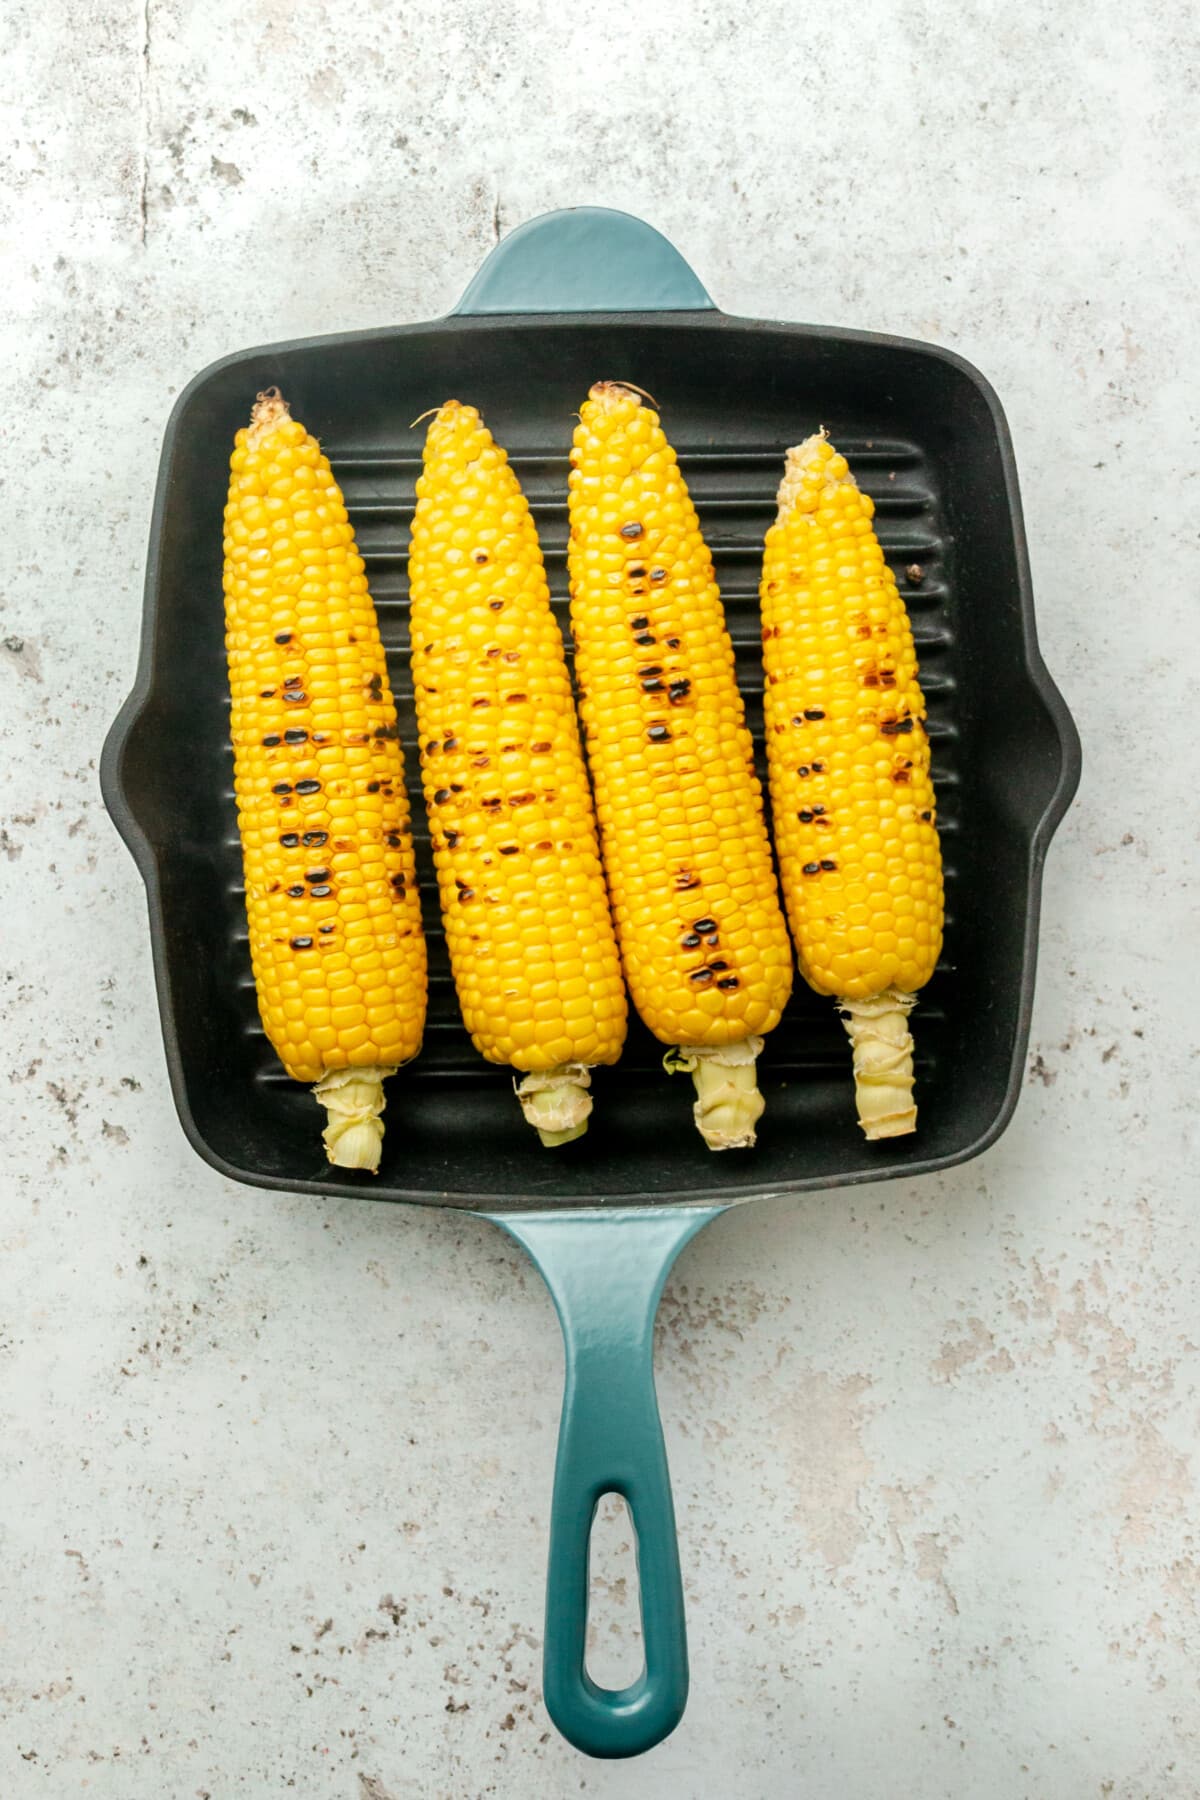 Grilled corn sits in a grill skillet on a light grey surface.